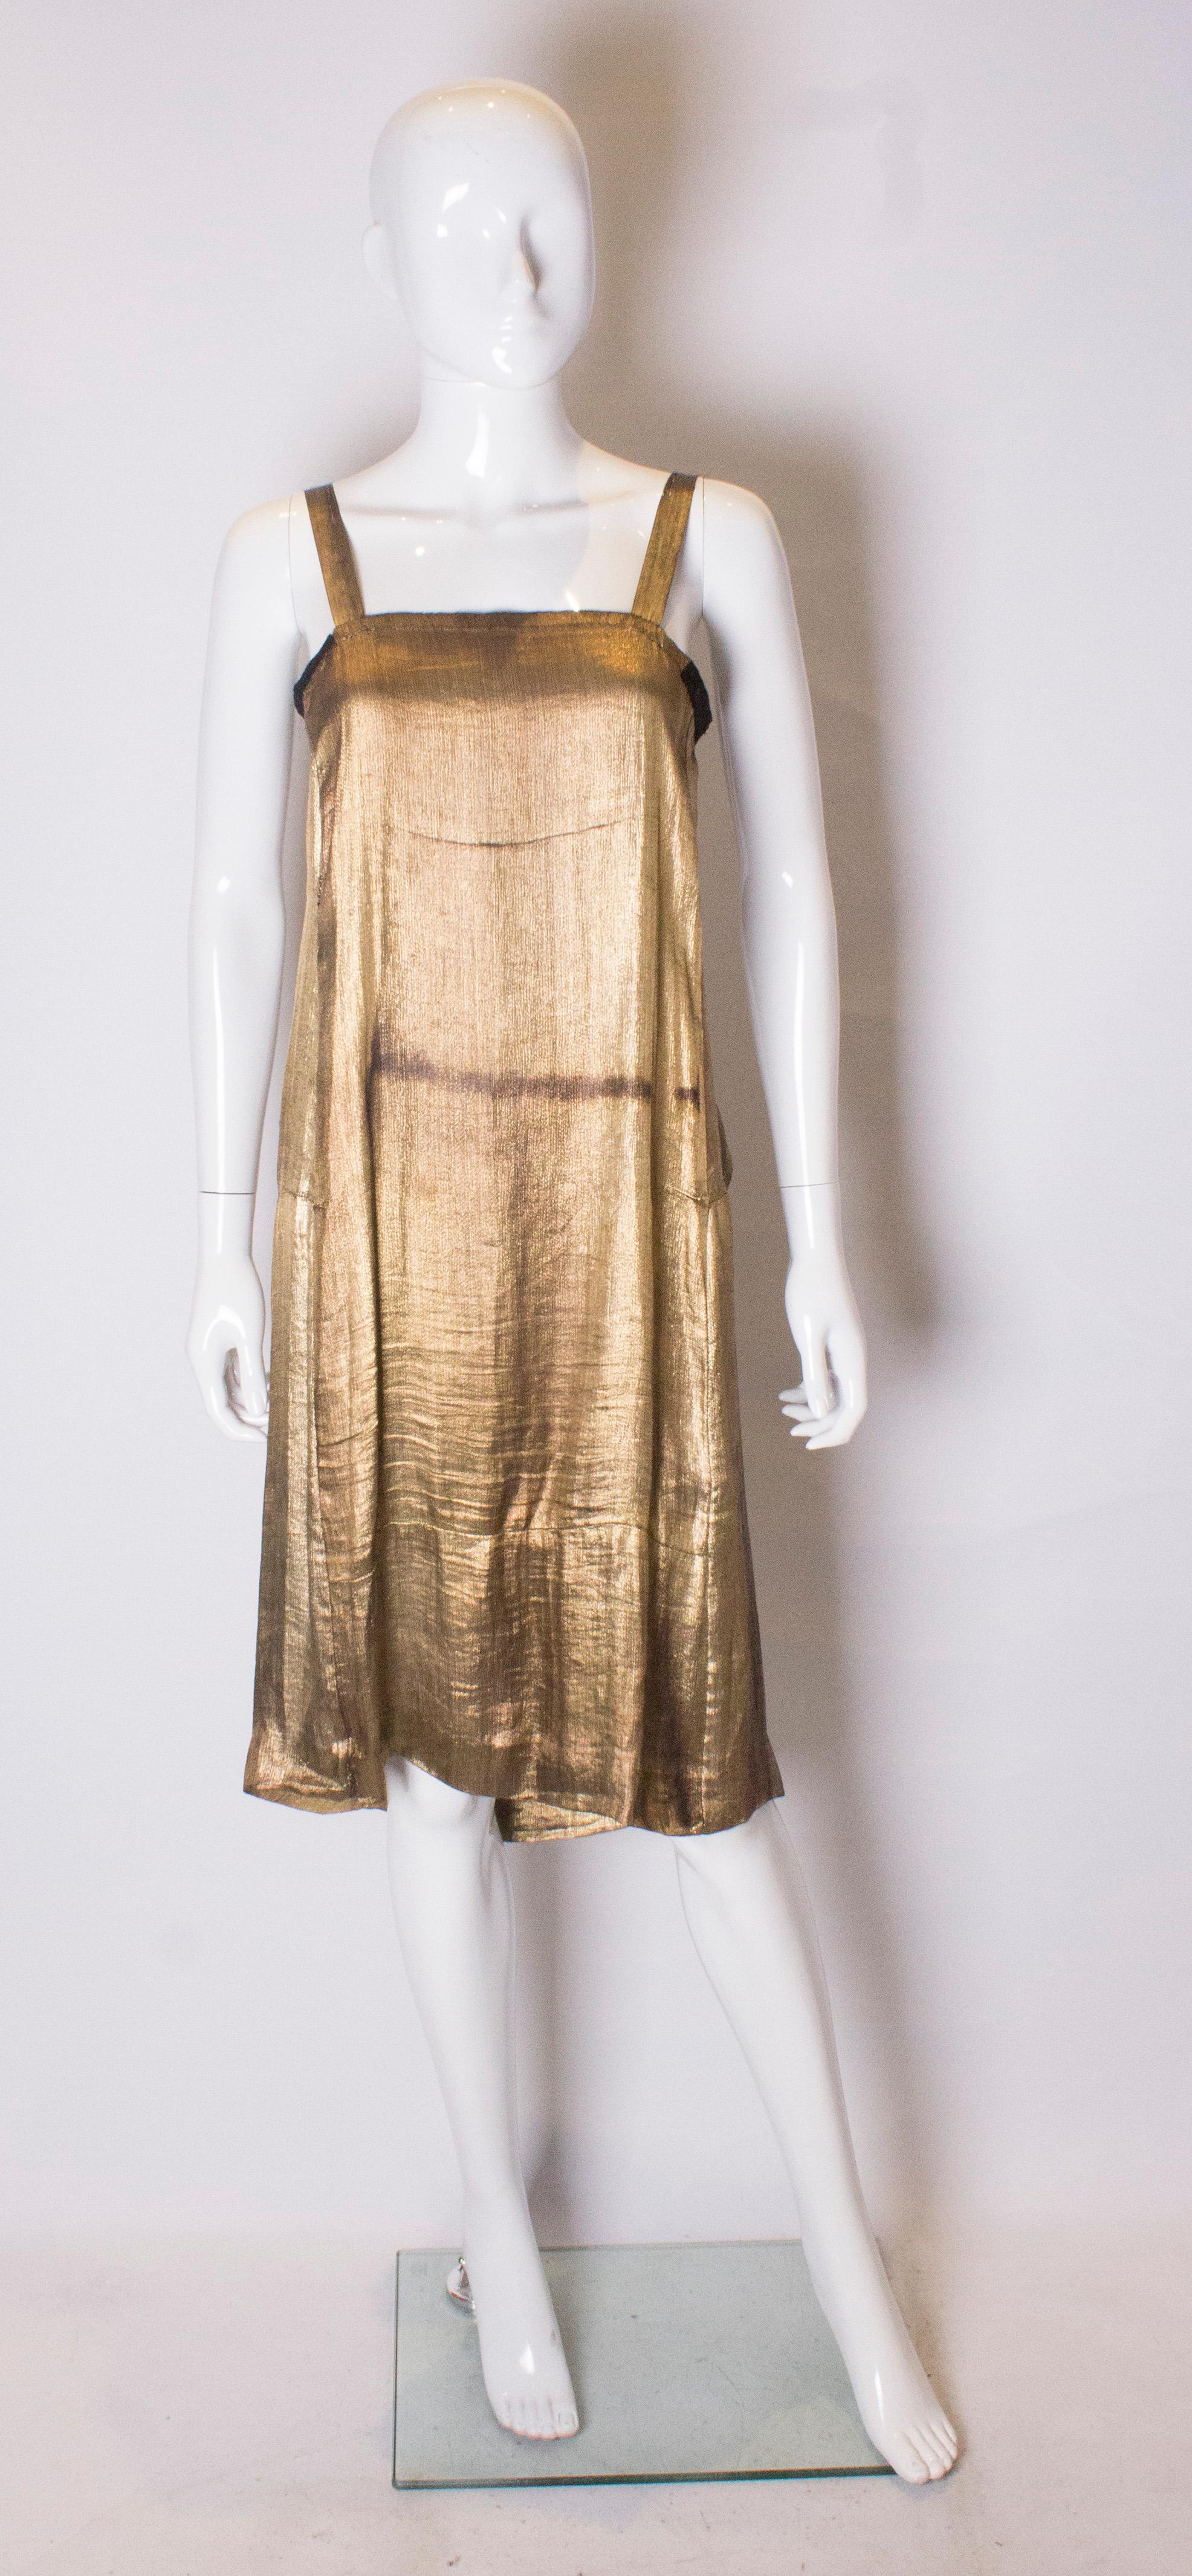 A super chic vintage gold lame dress from the 1920s.
The dress slips over the head and is in a lovely soft gold colour . There is a small amount of tarnishing .